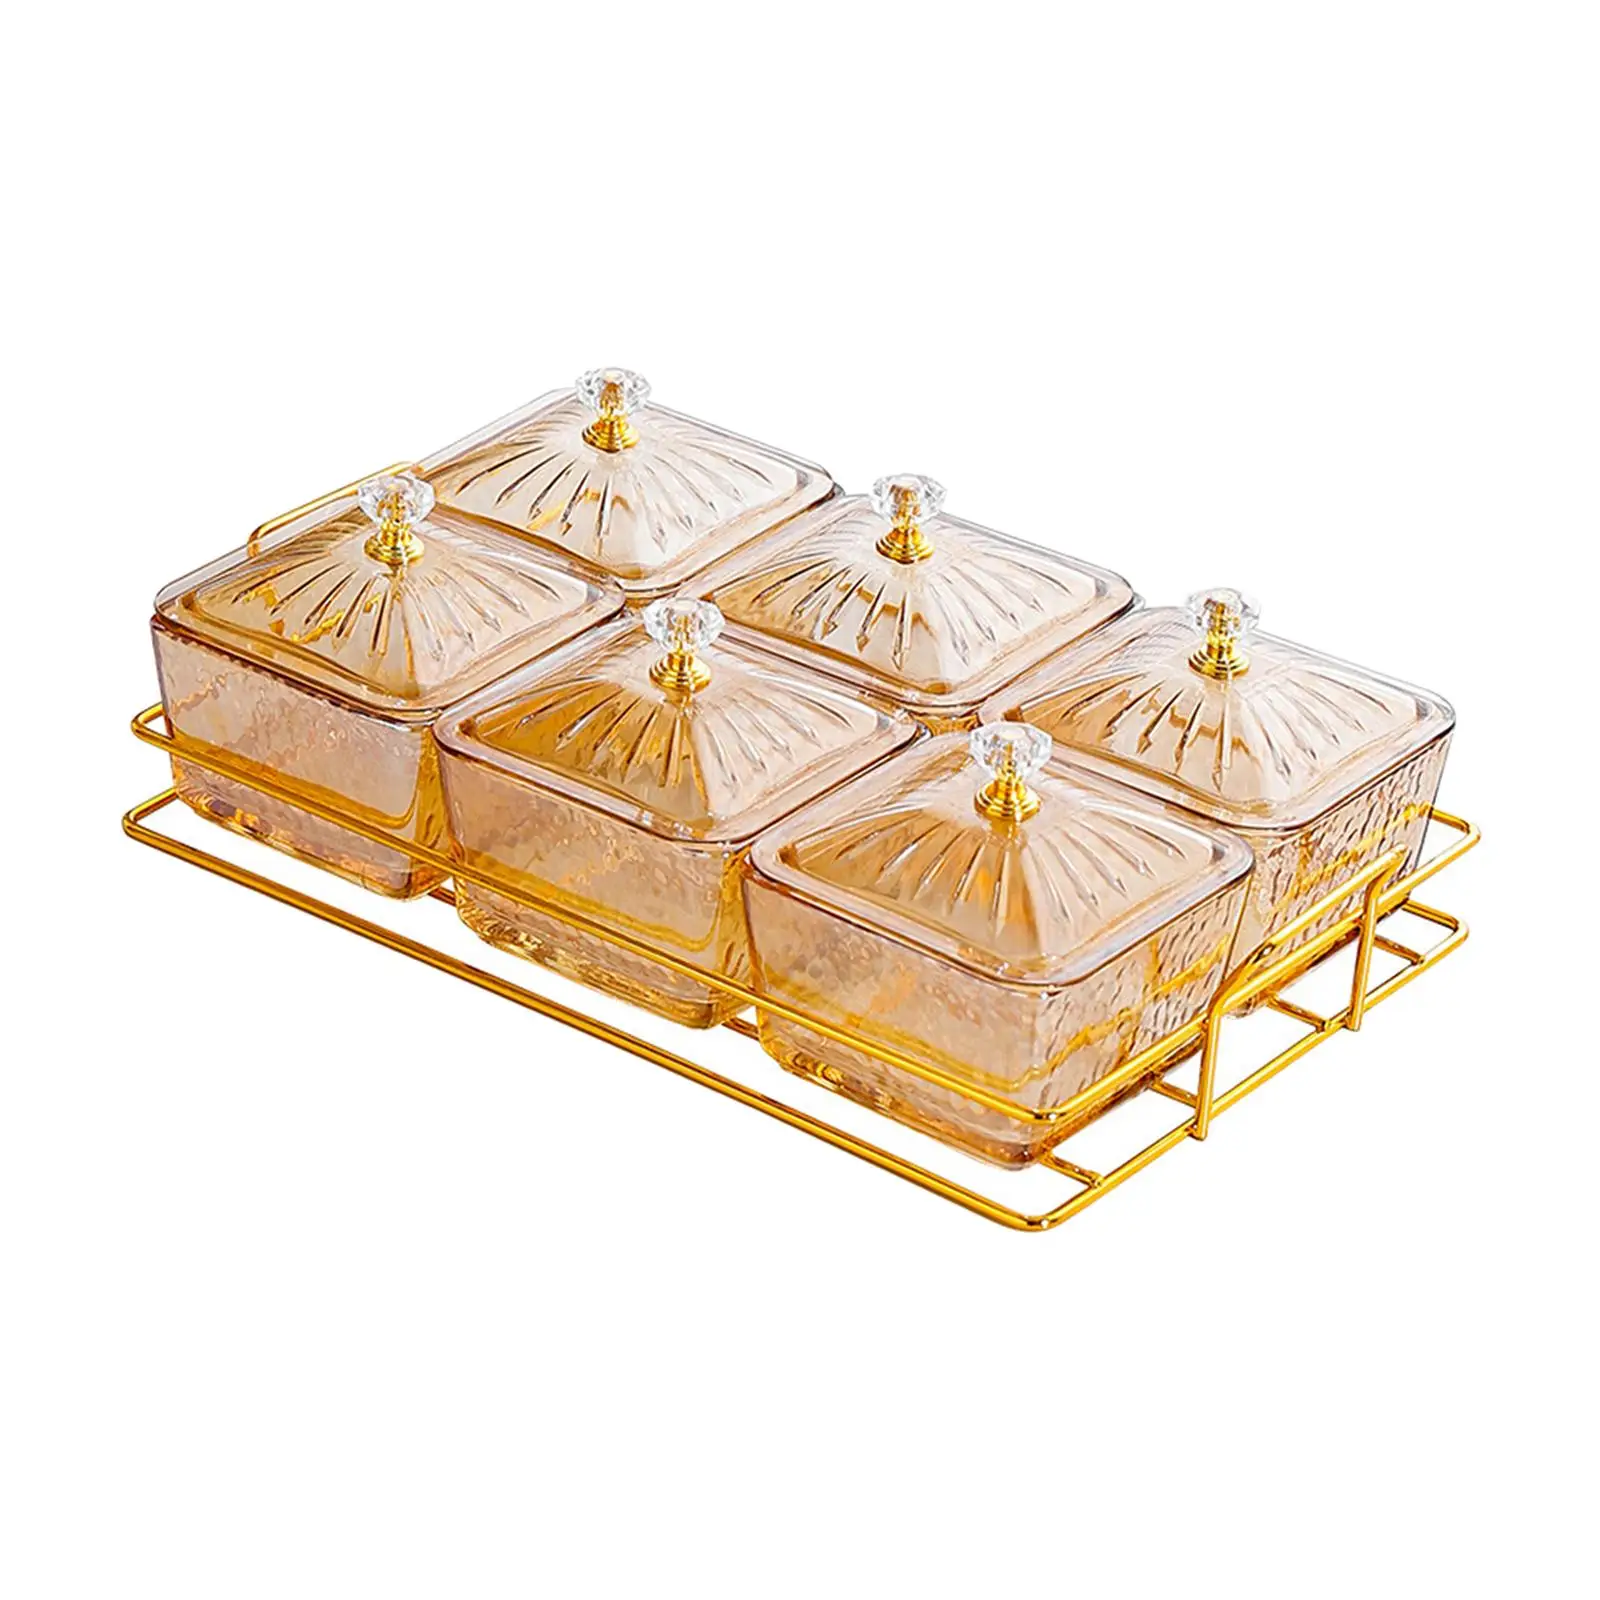 Nuts Candies Container Appetizer Tray with 6 Individual Bowls Platters with Stand Condiment Tray Serving Dishes for Dried Fruits